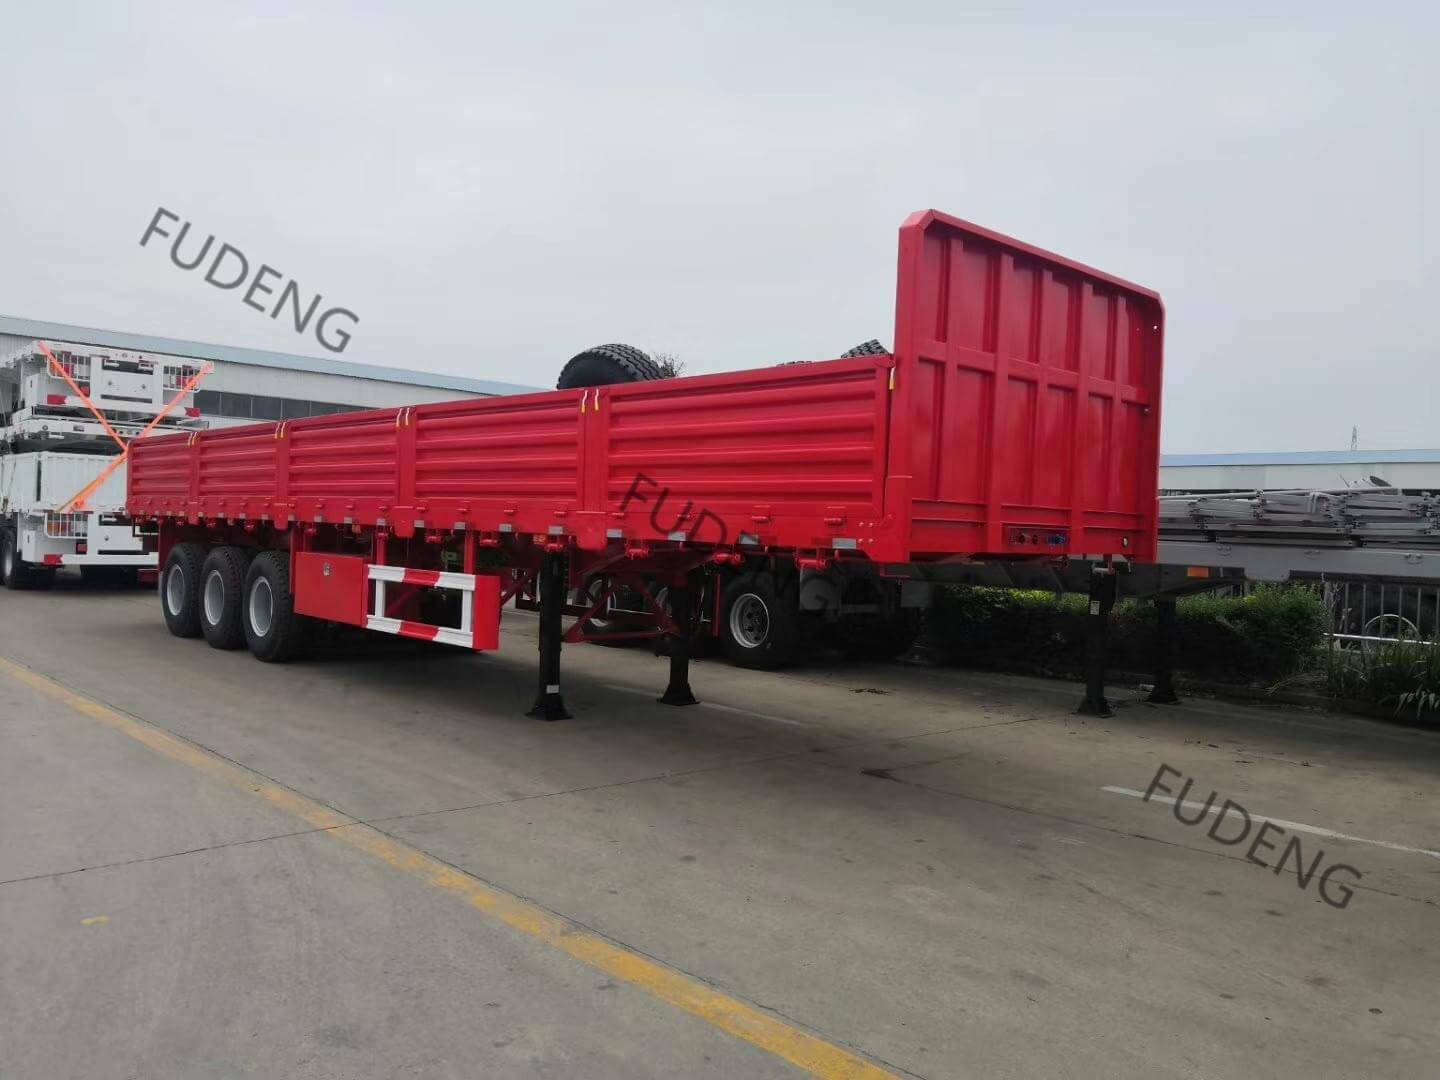 How to choose fence cargo trailer or side wall trailer?